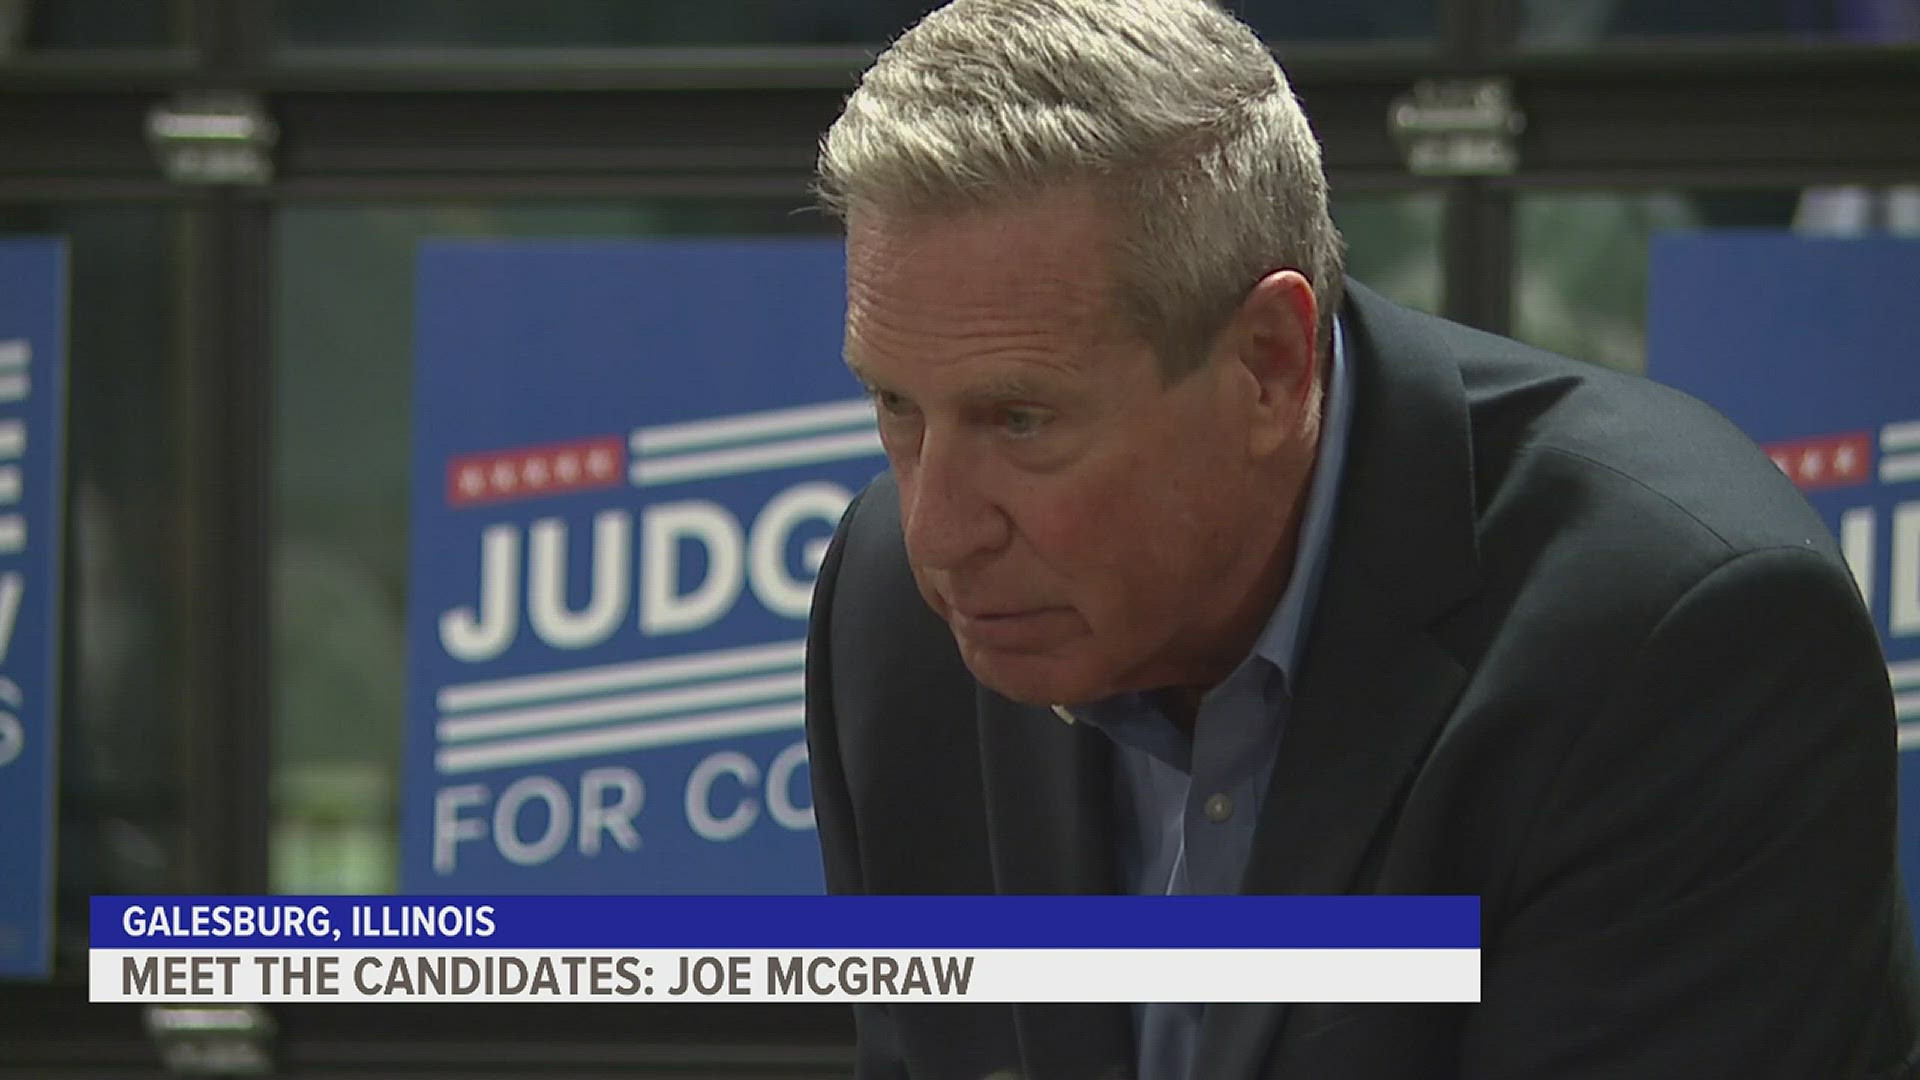 Joe McGraw is a retired judge from Rockford running as a Republican in the Illinois primary.